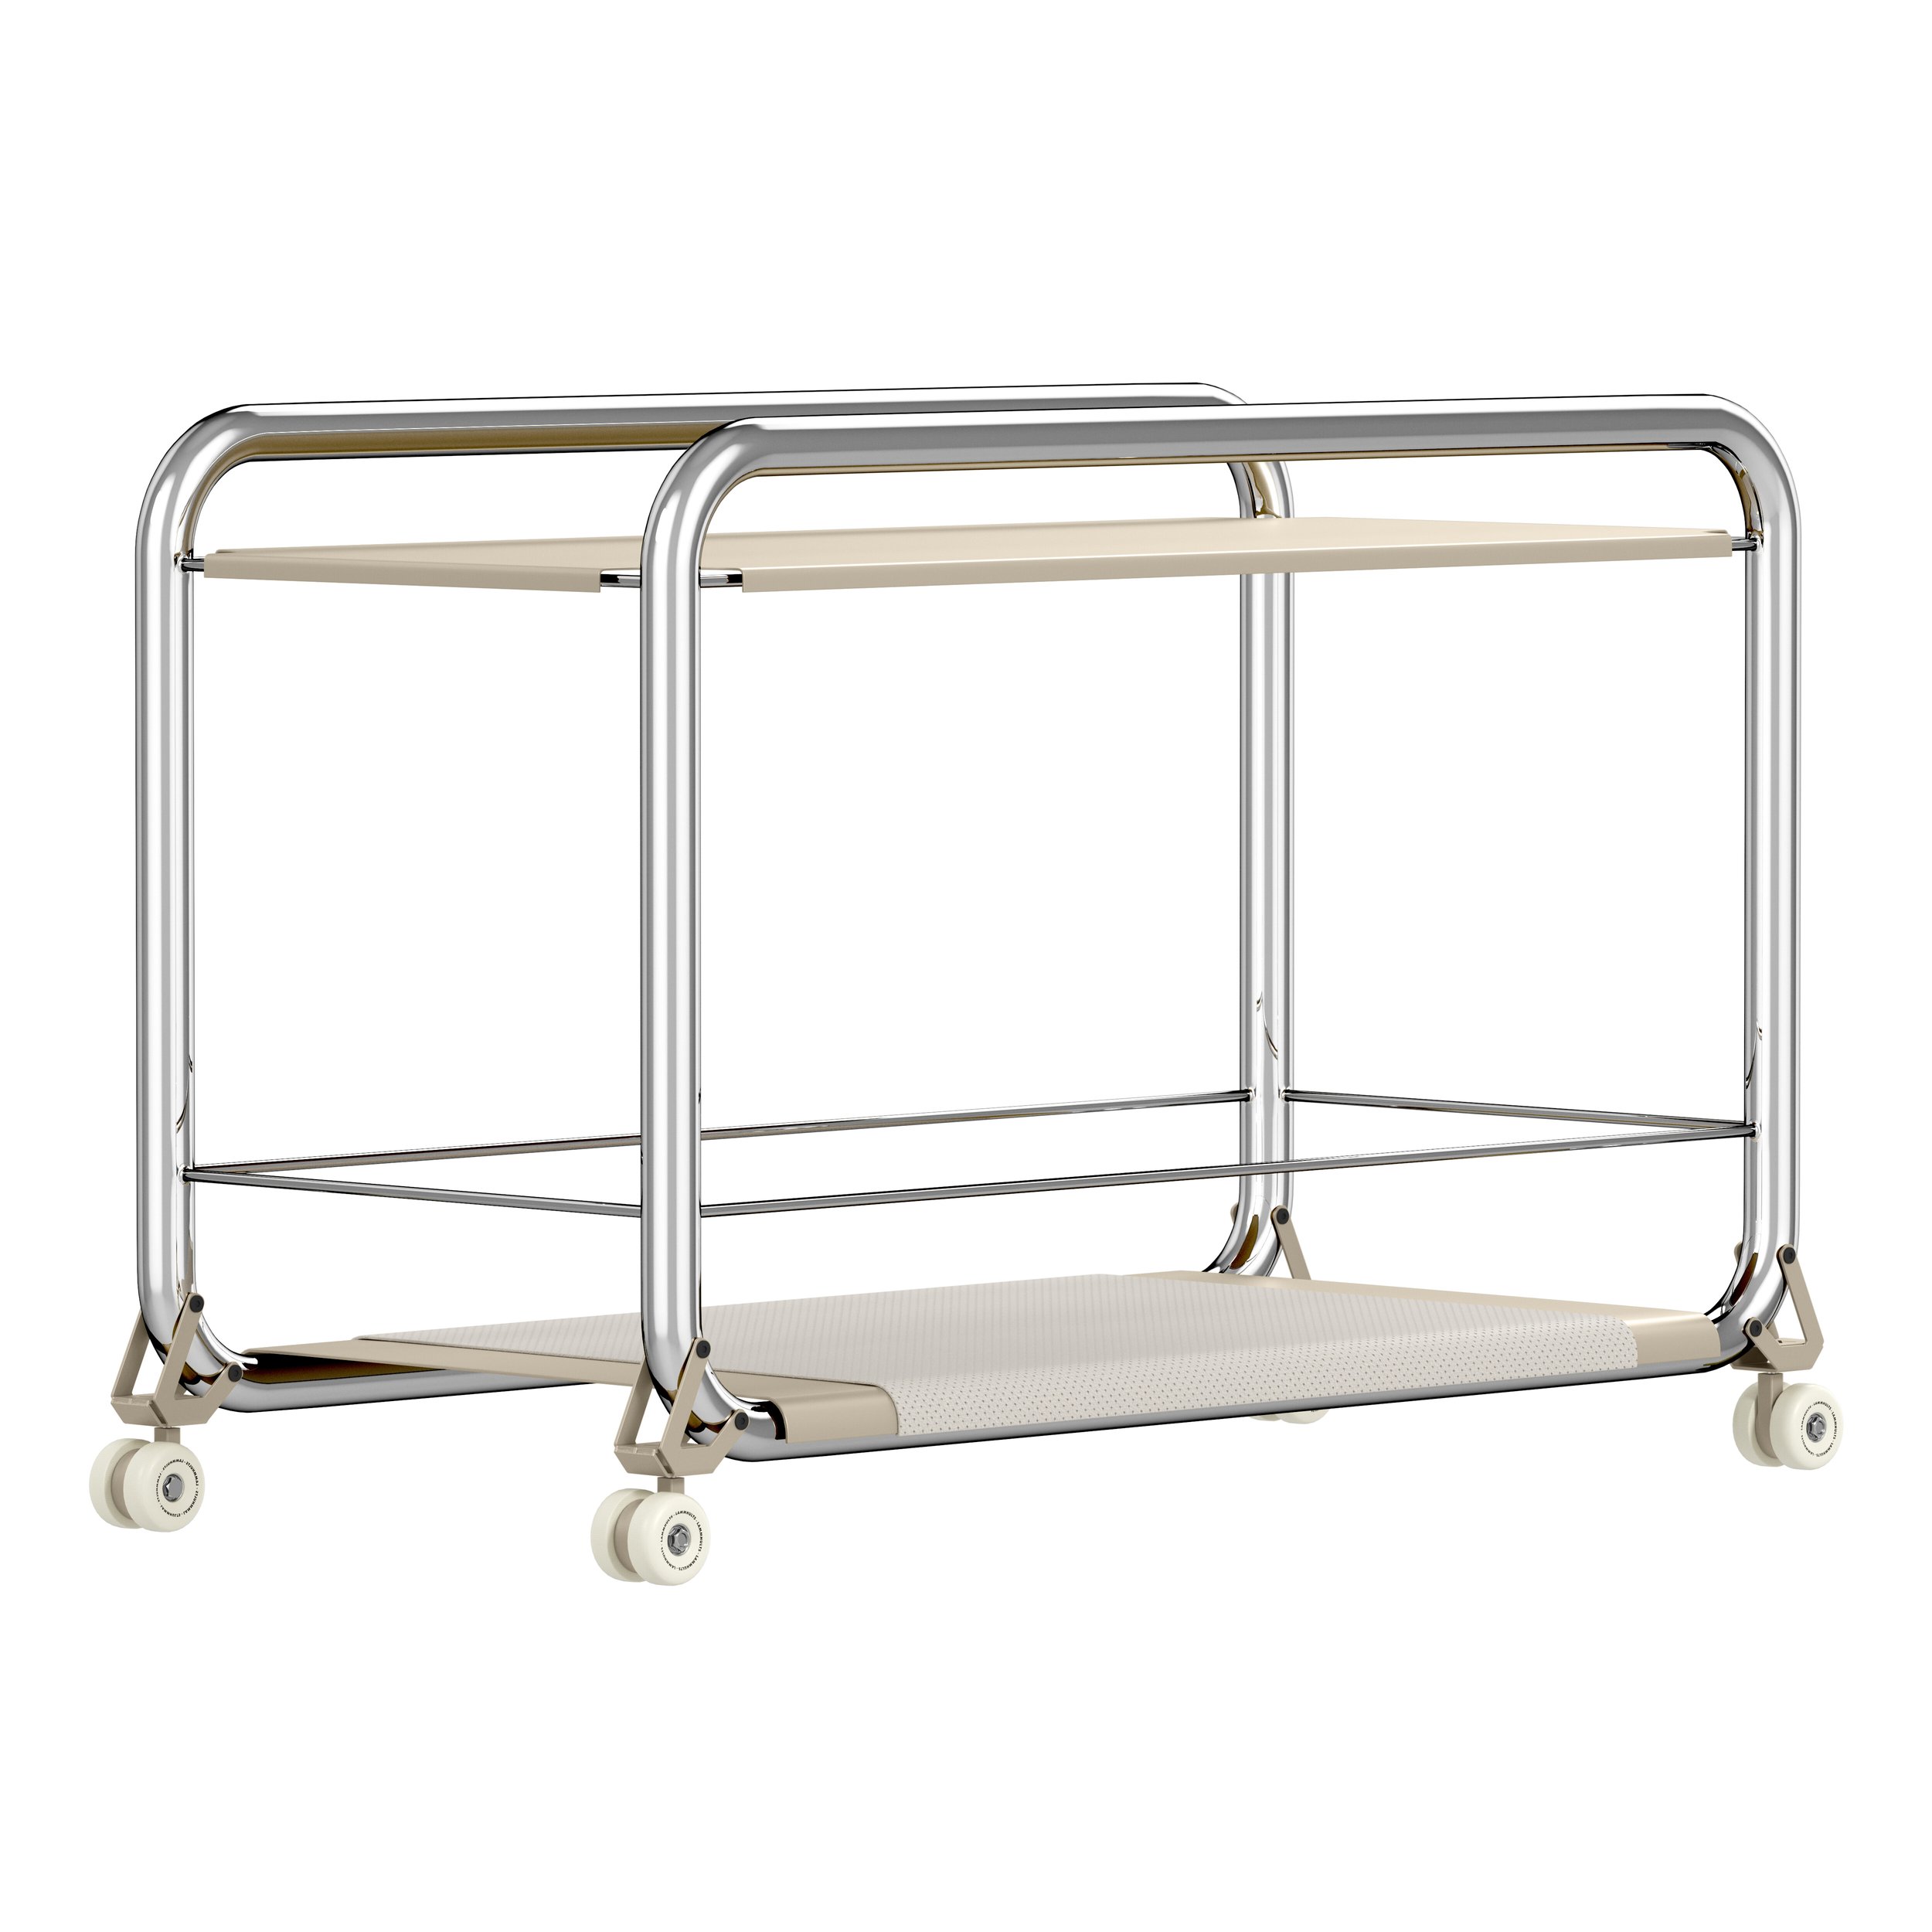 Lammhults_Tension_trolley_chrome_beige_leatherlining_frontangle.jpeg